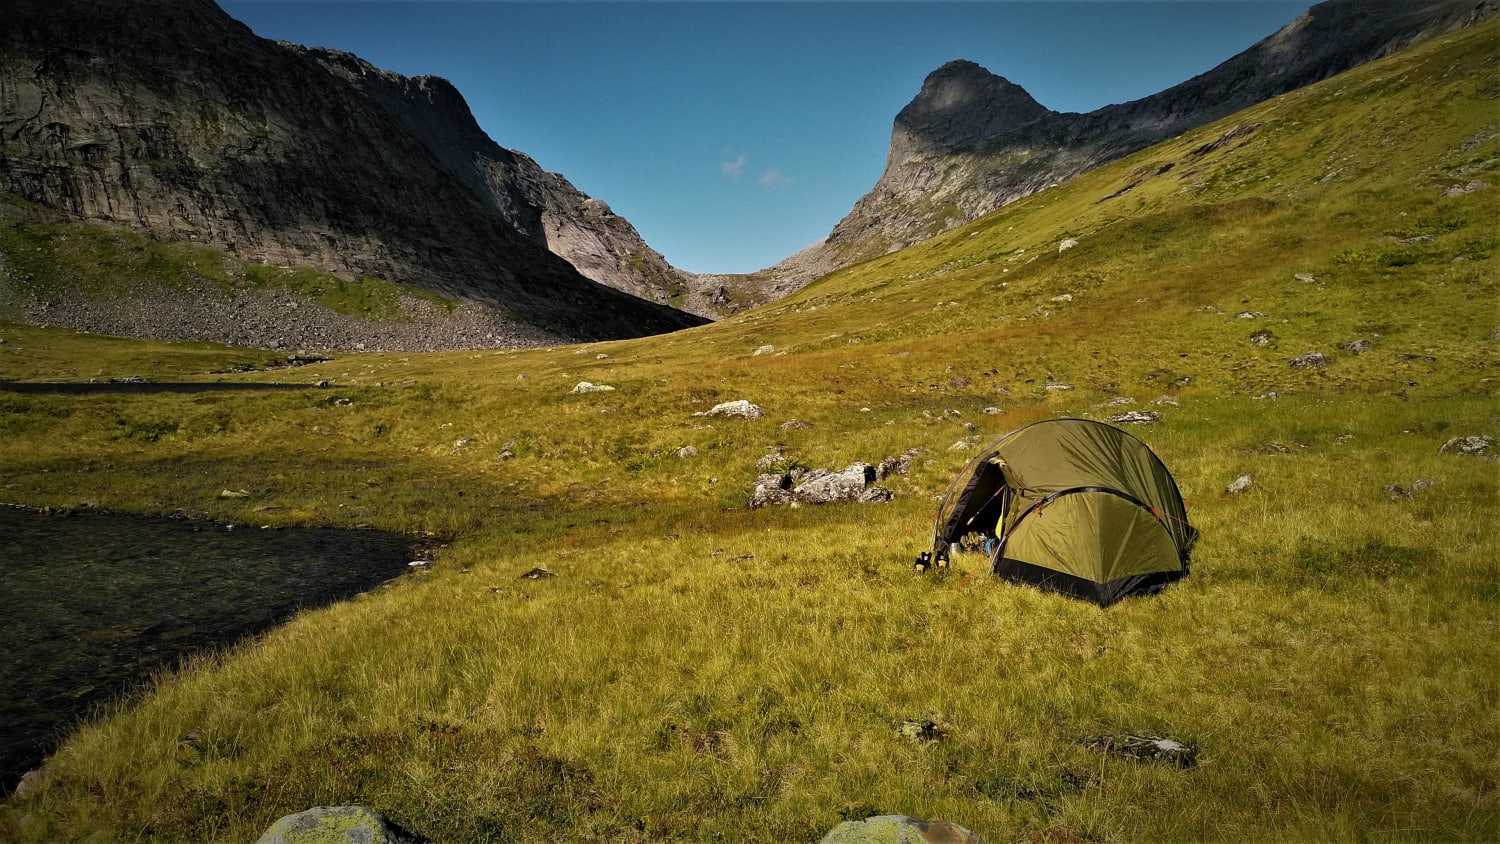 Hiking and Camping in Northern-Norway above the Arctic Circle last summer!